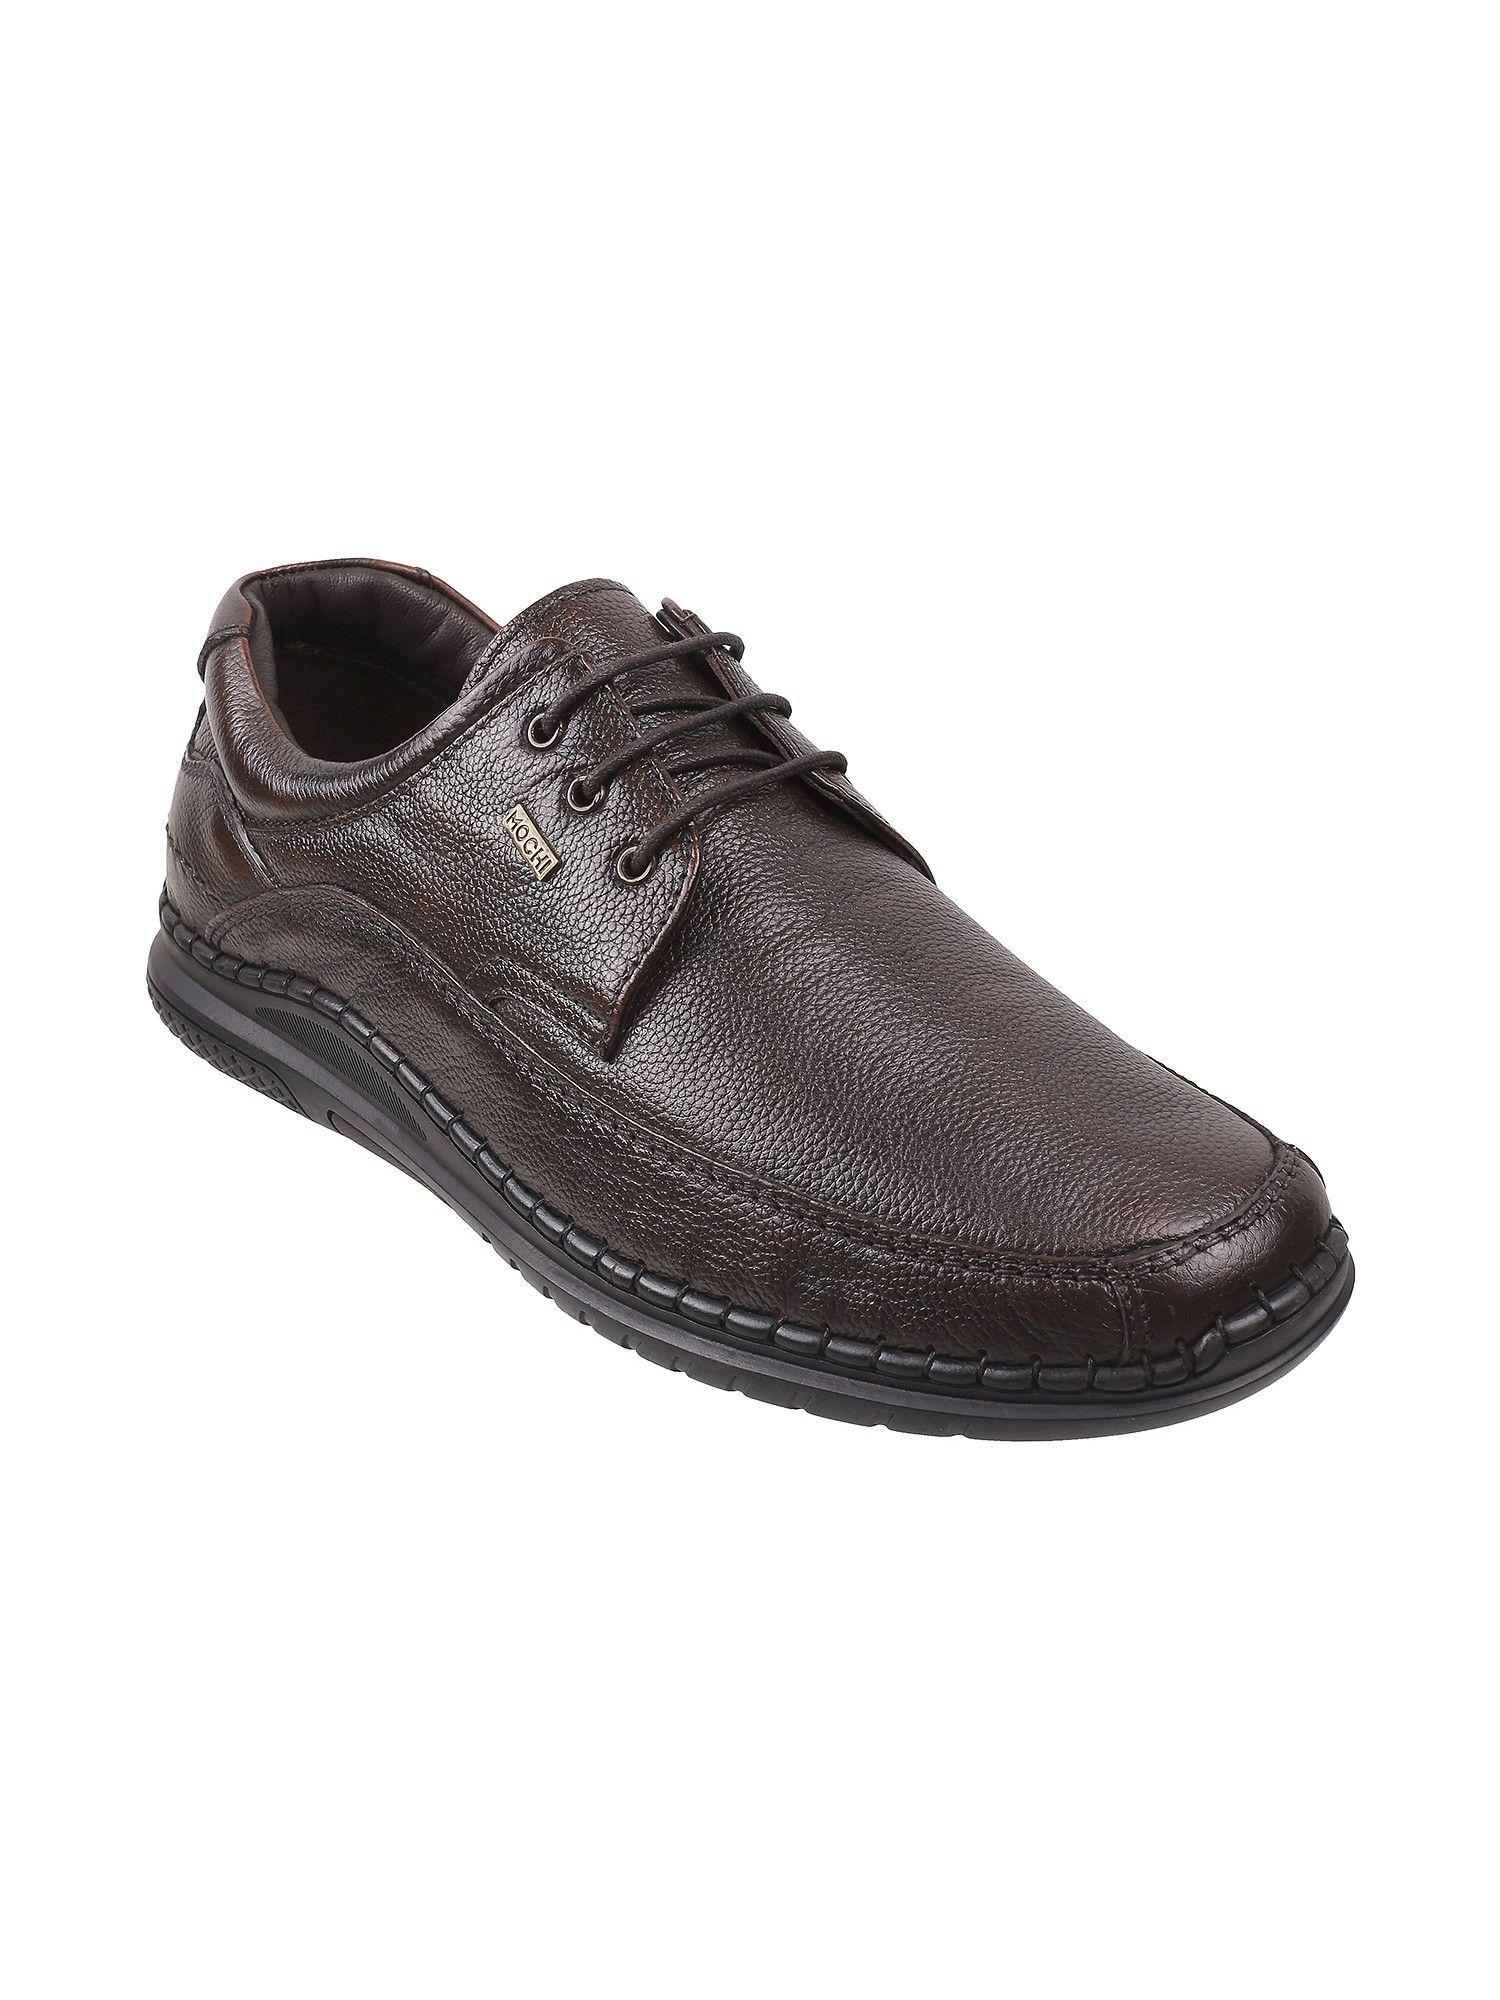 mens-brown-leather-solid-plain-casual-shoes